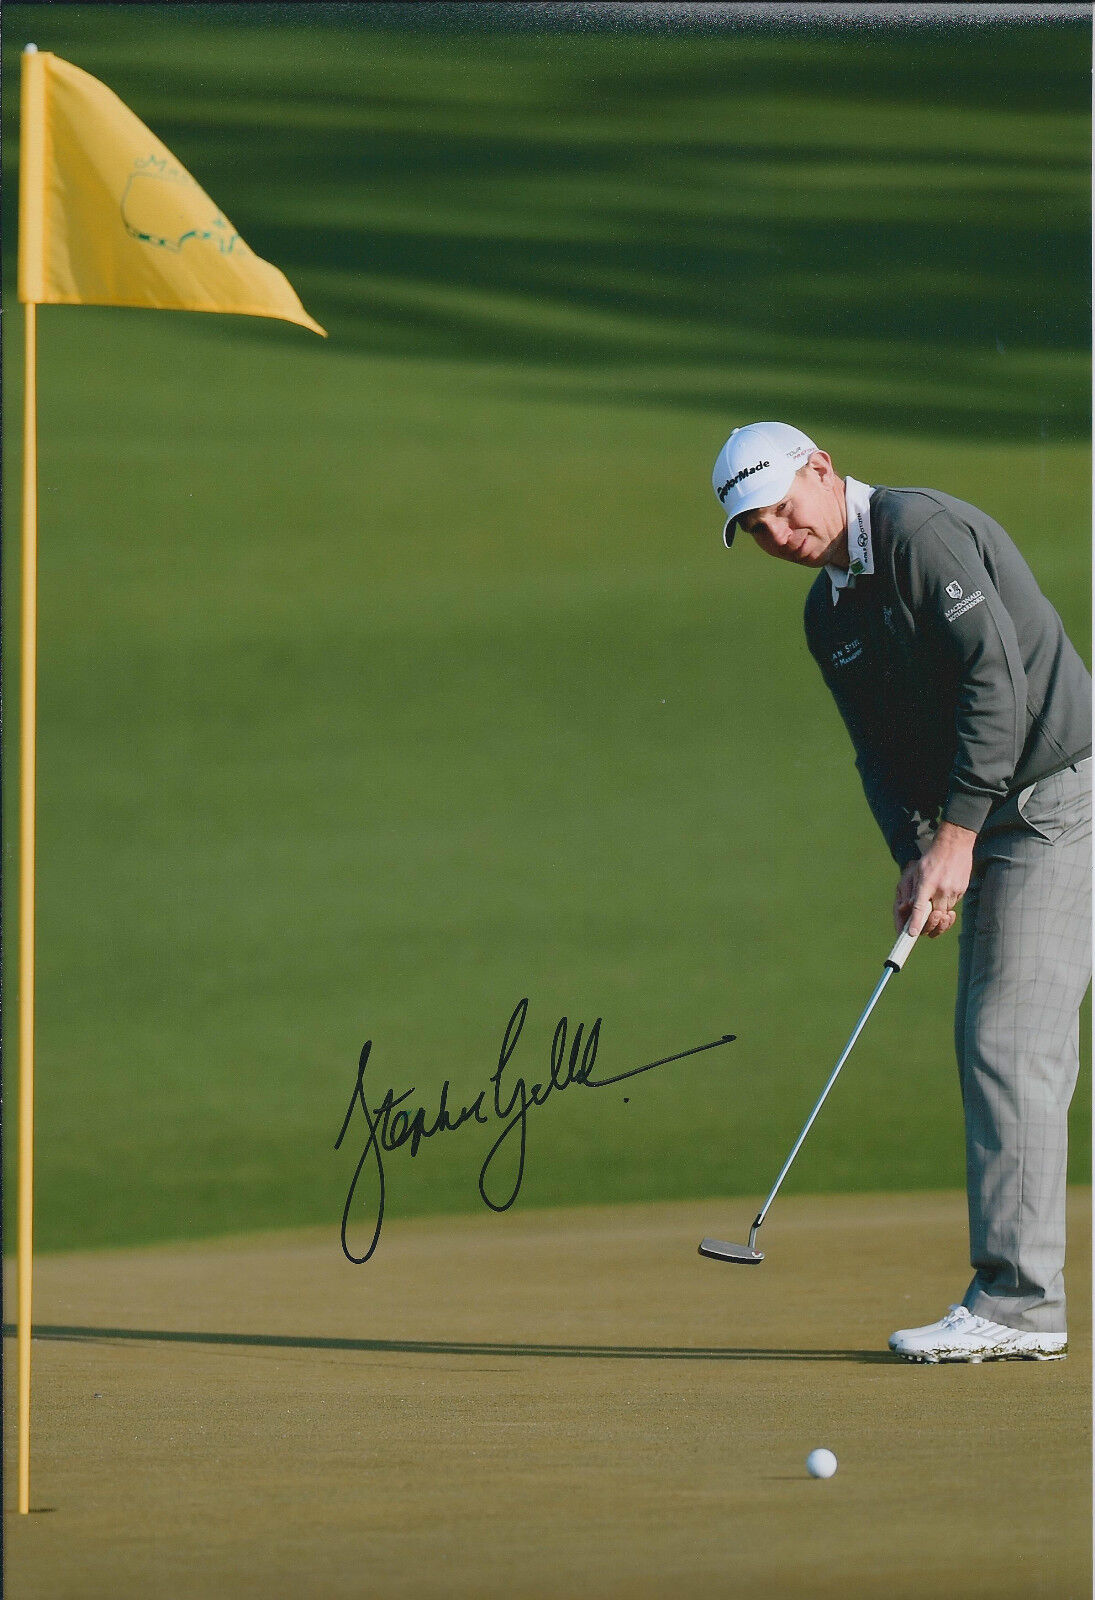 Stephen GALLACHER SIGNED Autograph 12x8 Photo Poster painting AFTAL COA 2014 US MASTERS Golf